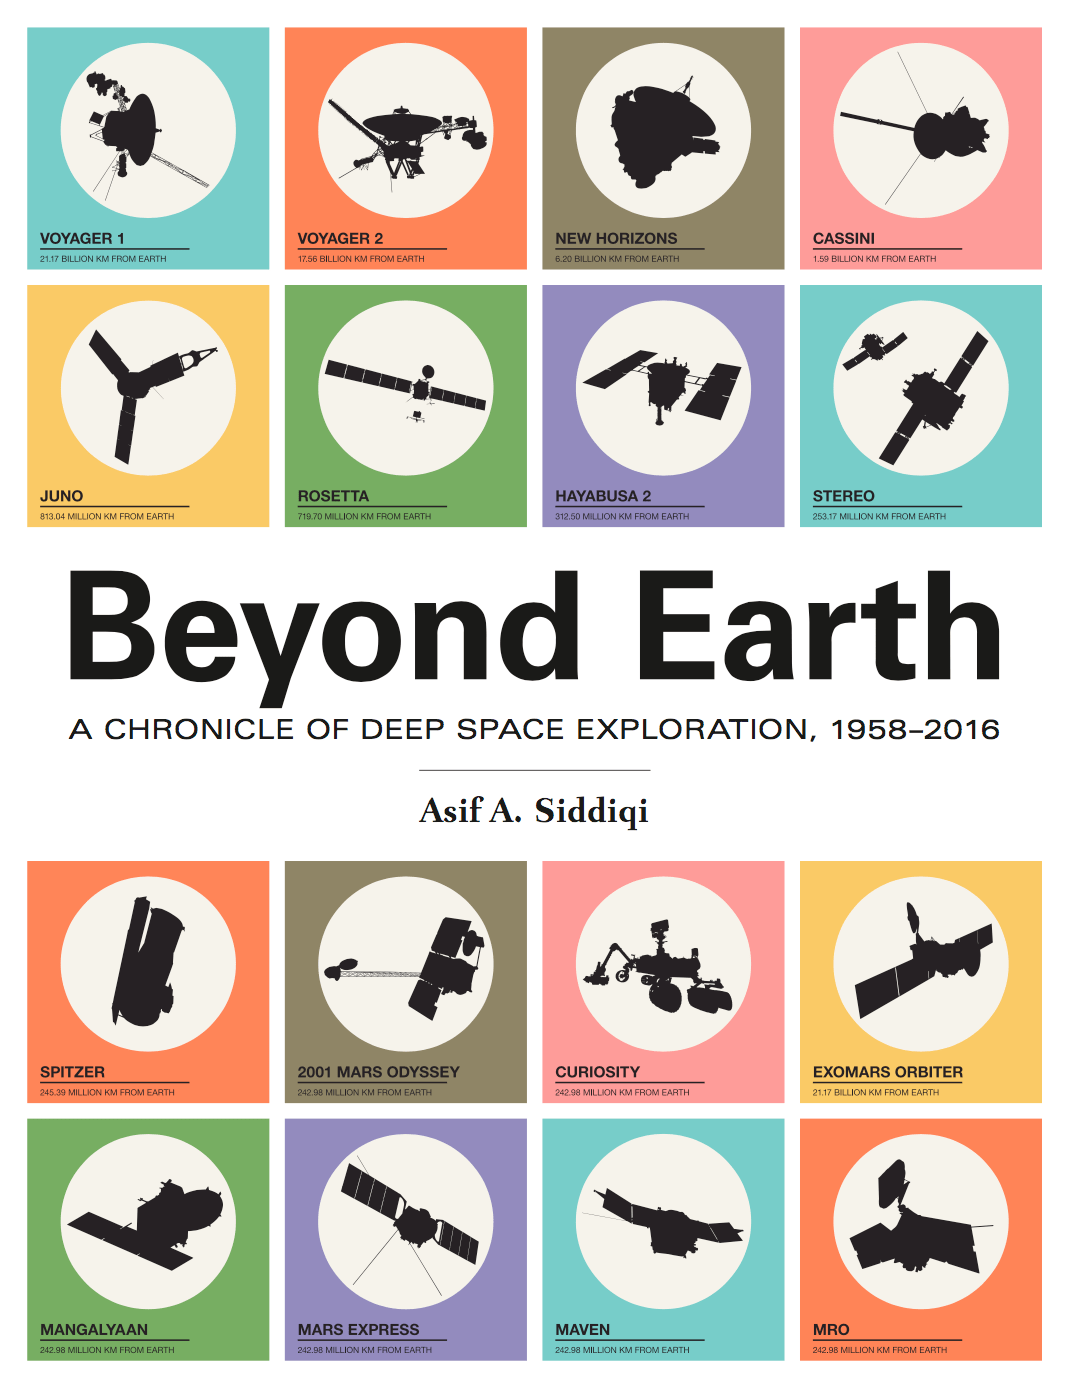 Colorful book cover for Beyond Earth: A Chronicle of Deep Space Exploration. It features spacecraft cutouts against a bright primary colors.